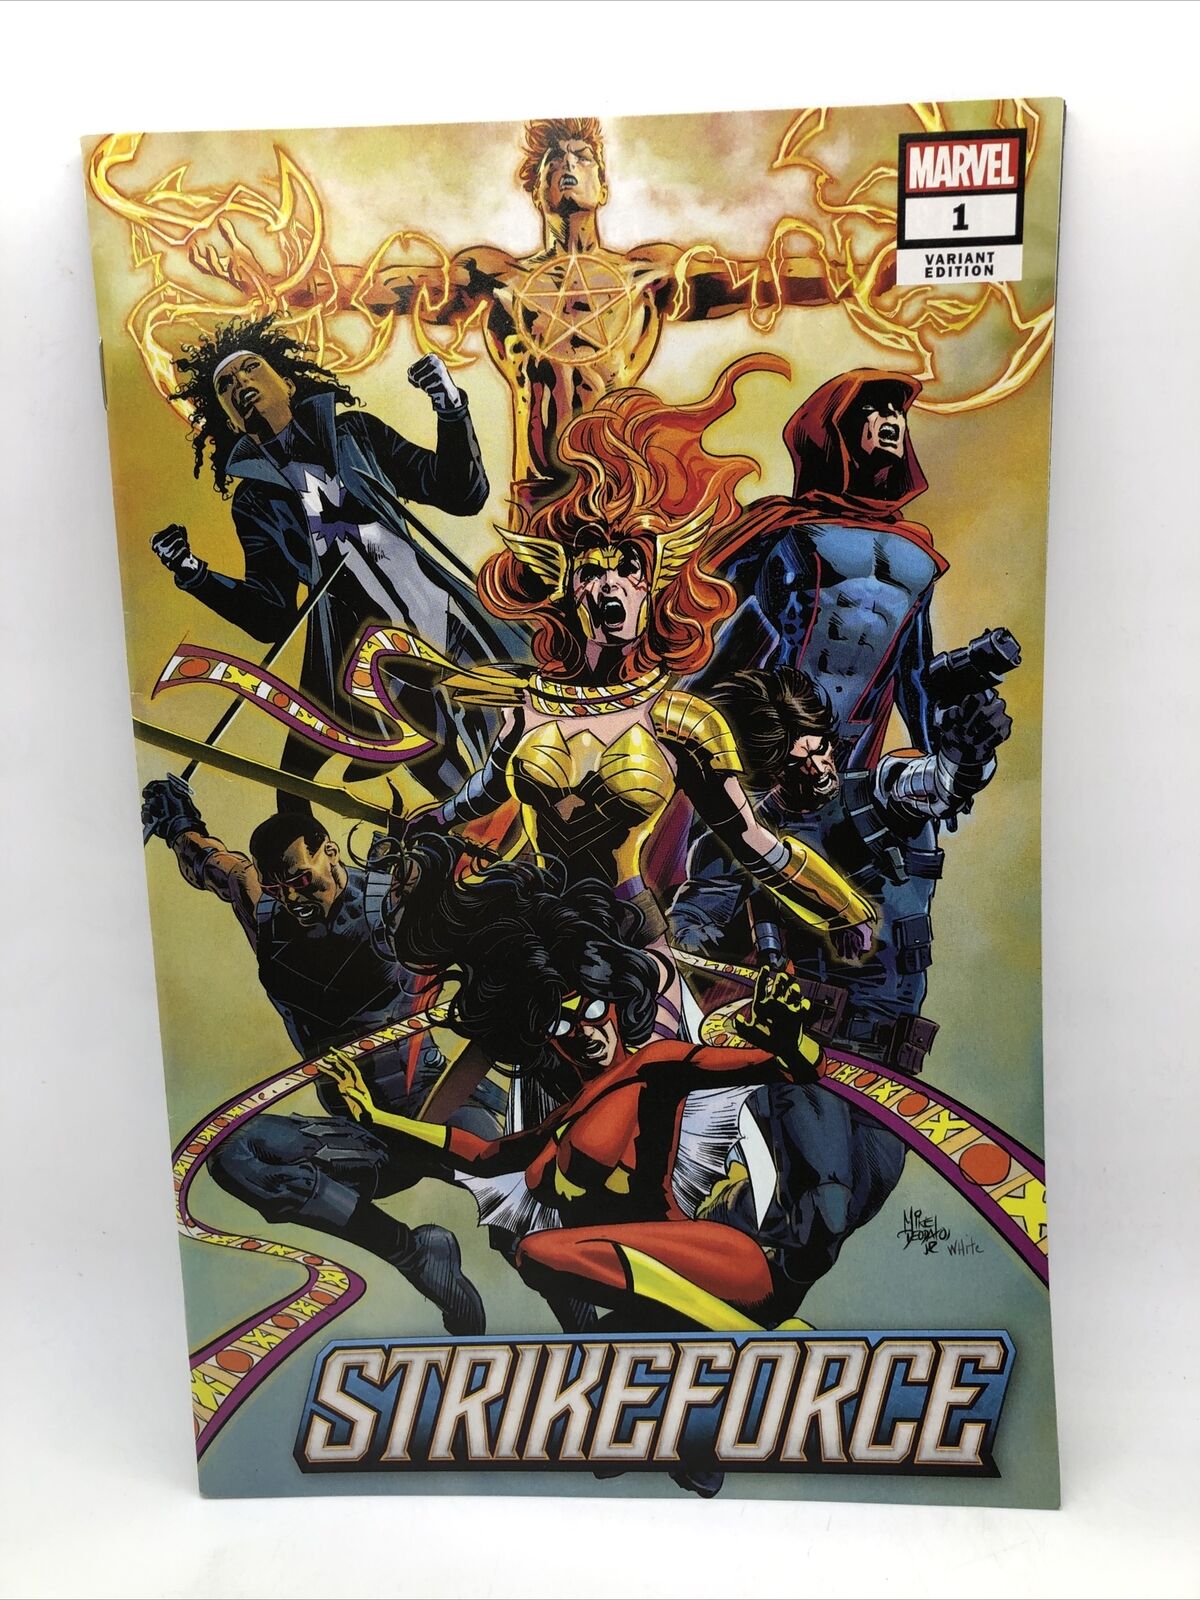 Strikeforce, Vol. 1 (2019) #1 Major Key Issue Mike Deodato Jr Variant Cover